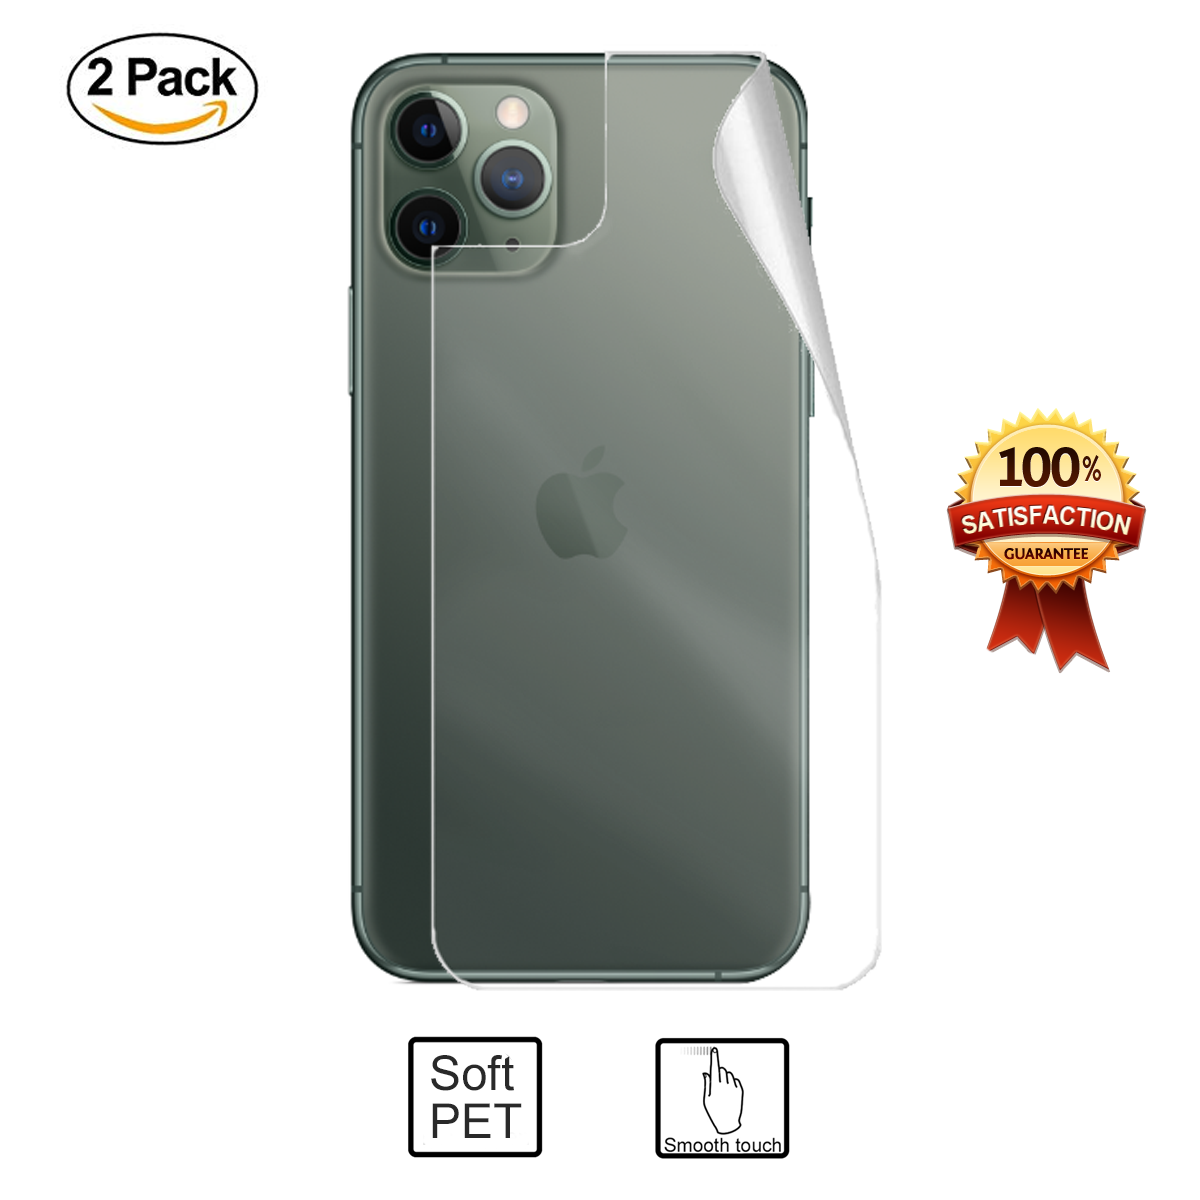 2x 3D CLEAR PET Soft Back Film Screen Protector for Apple iPhone 11 Pro Max - $4.99